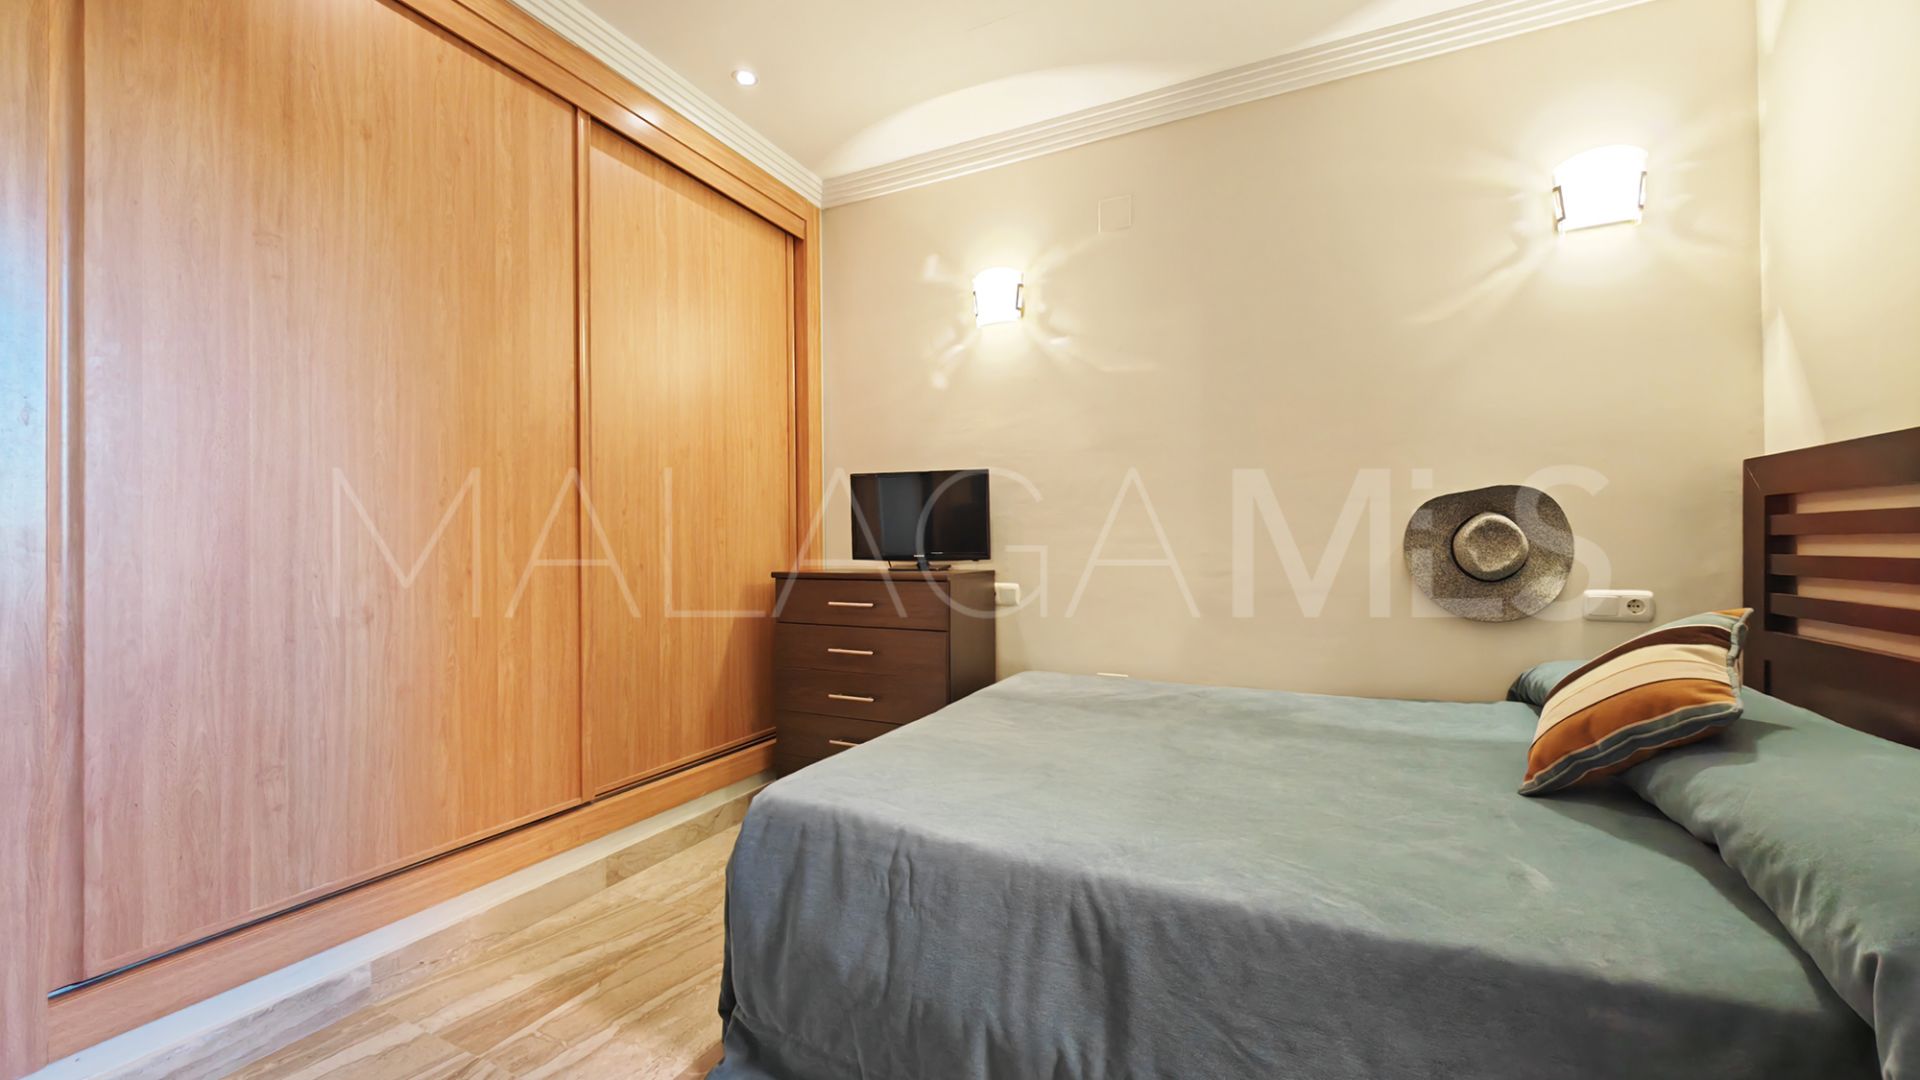 For sale Las Nayades apartment with 2 bedrooms